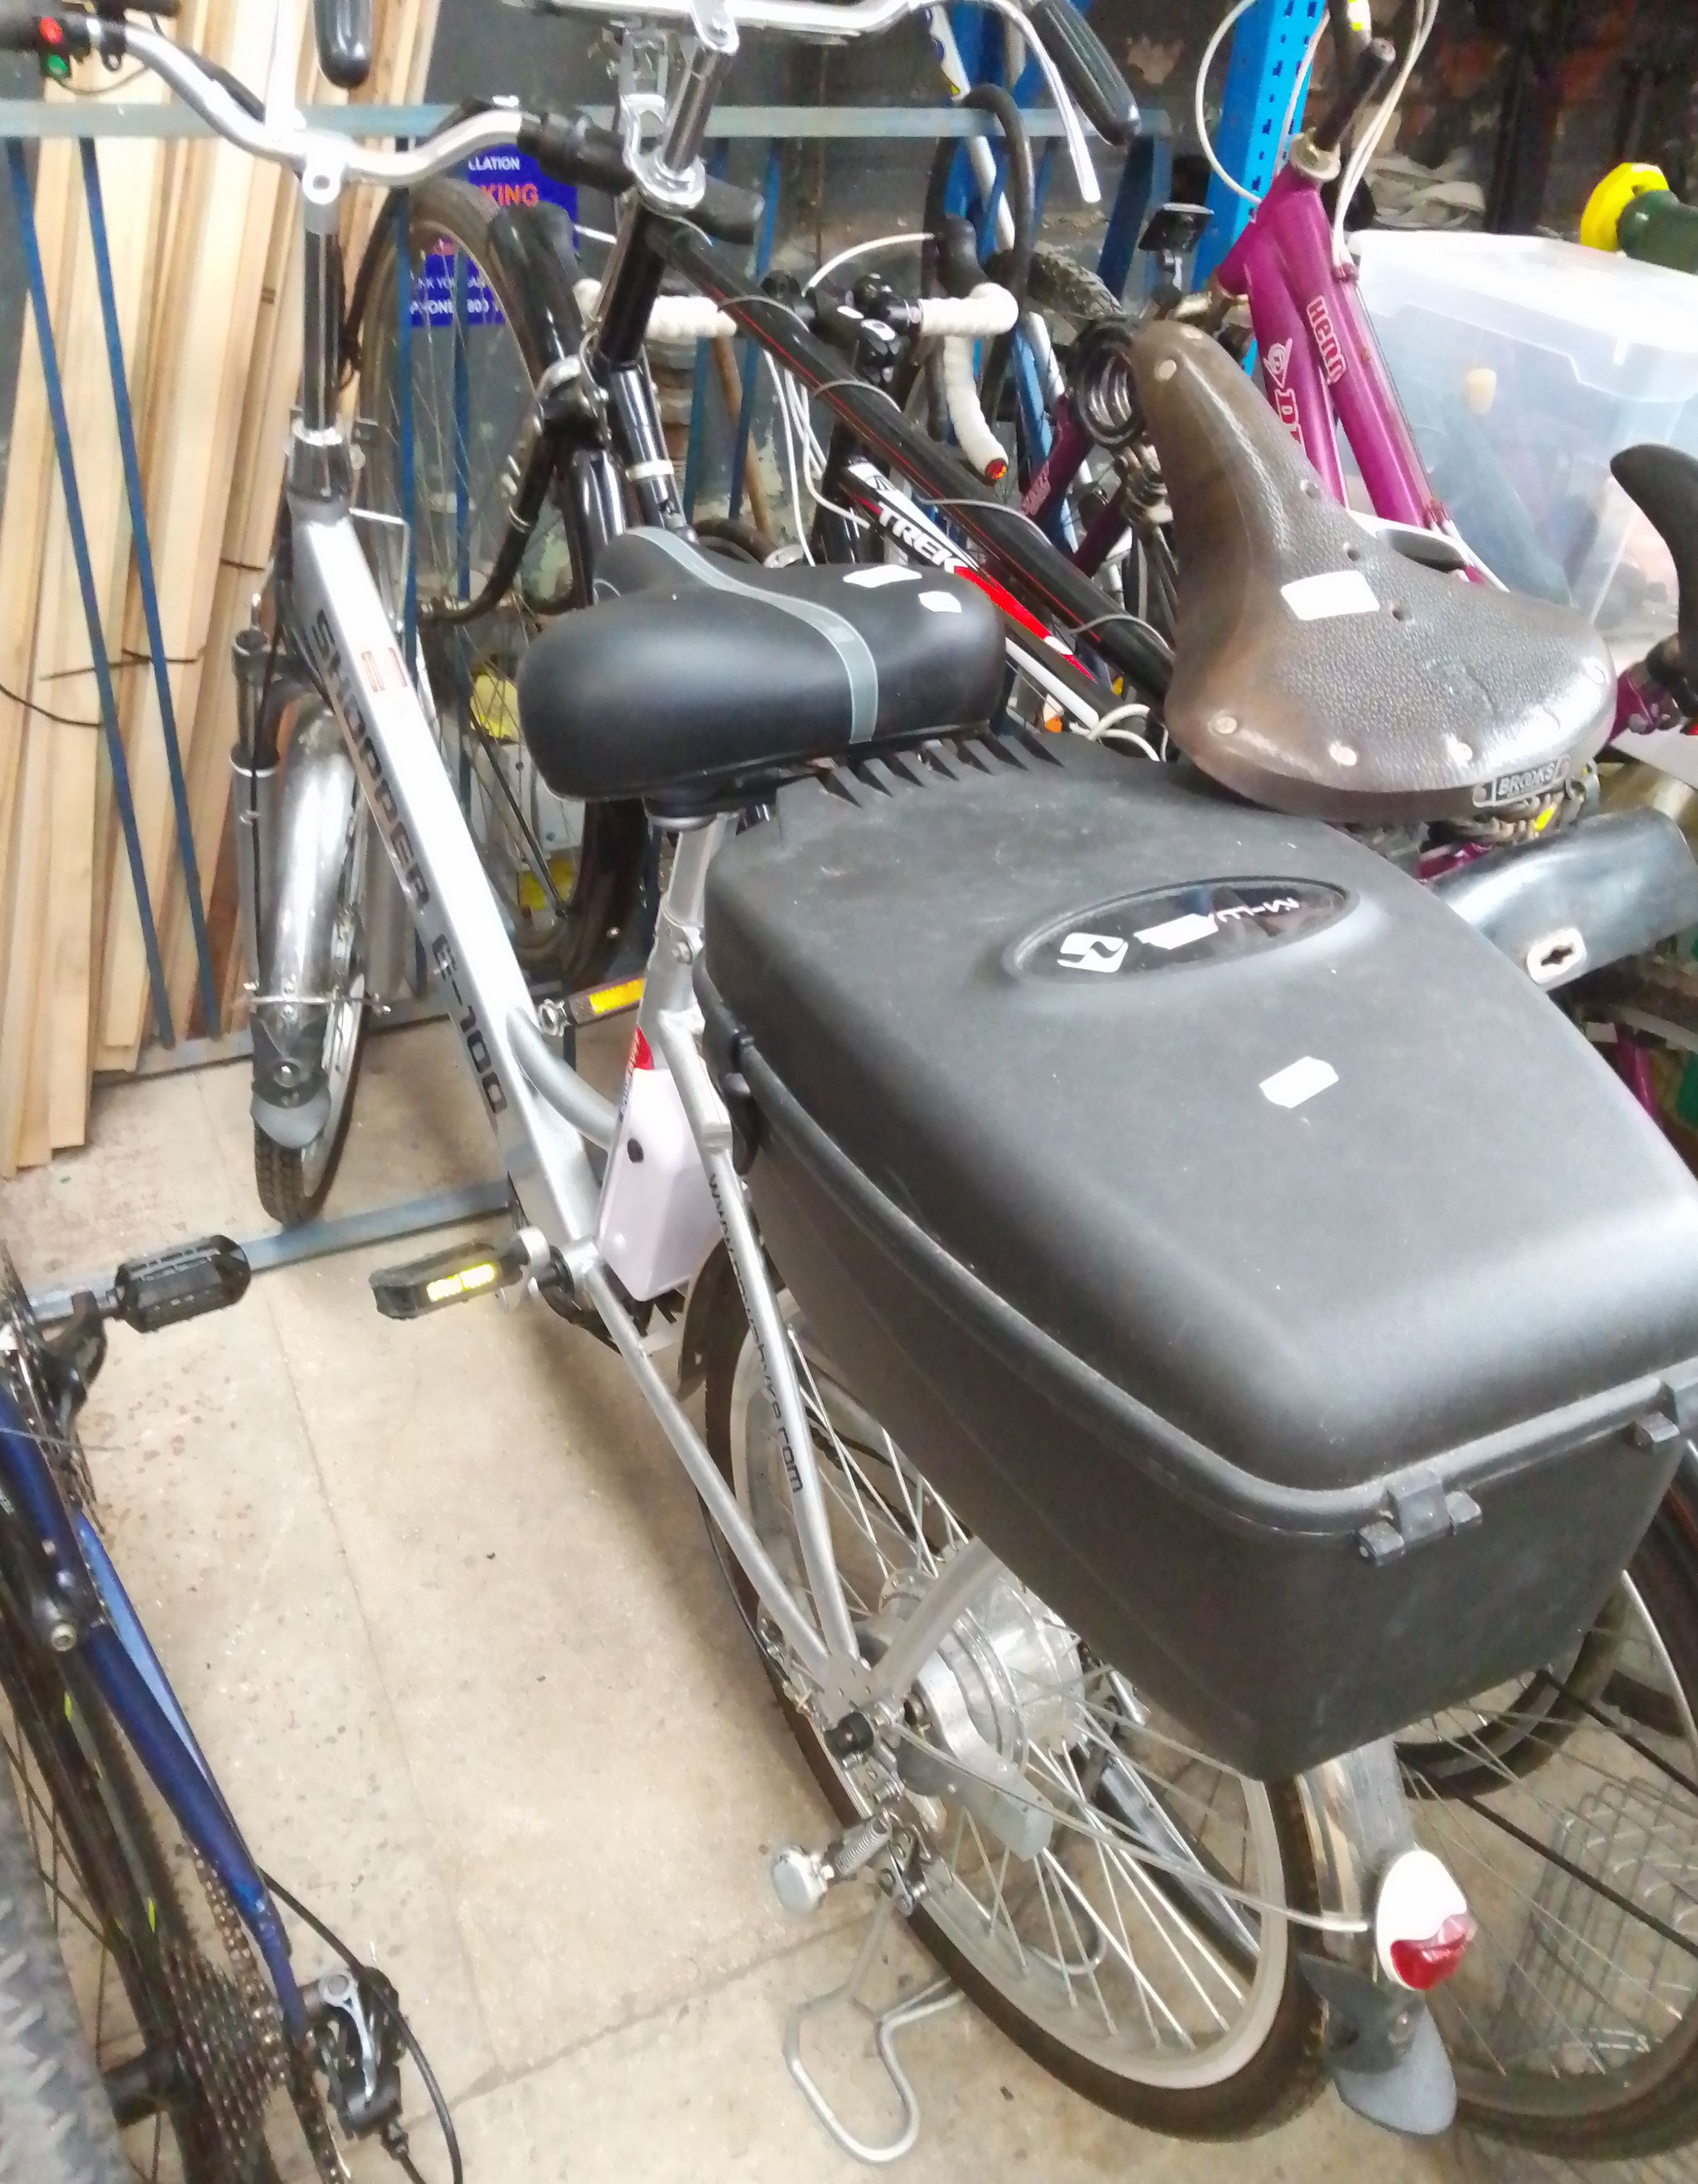 A Powabyke Shopper E-100 electric bicycle with charger and accessories.